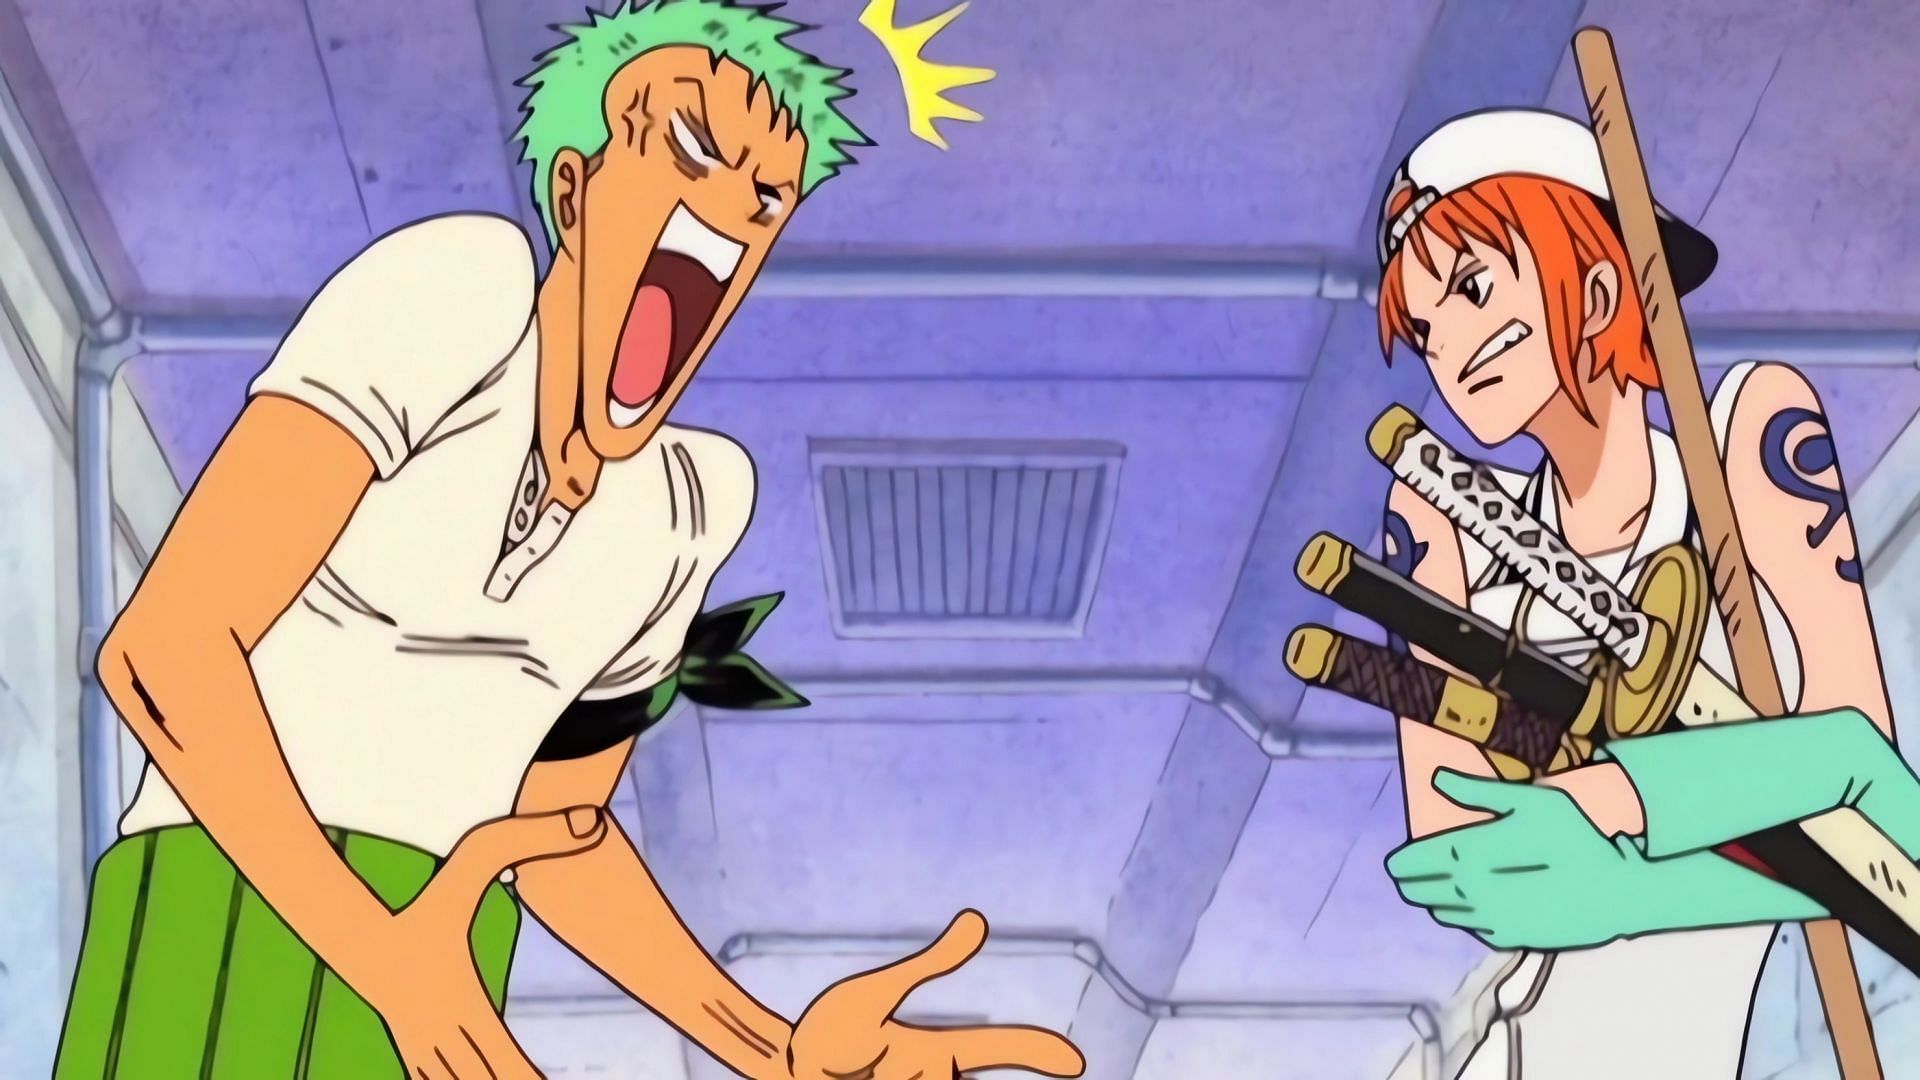 Zoro (left) and Nami (right) as seen in the One Piece arc (Image via Toei Animation)